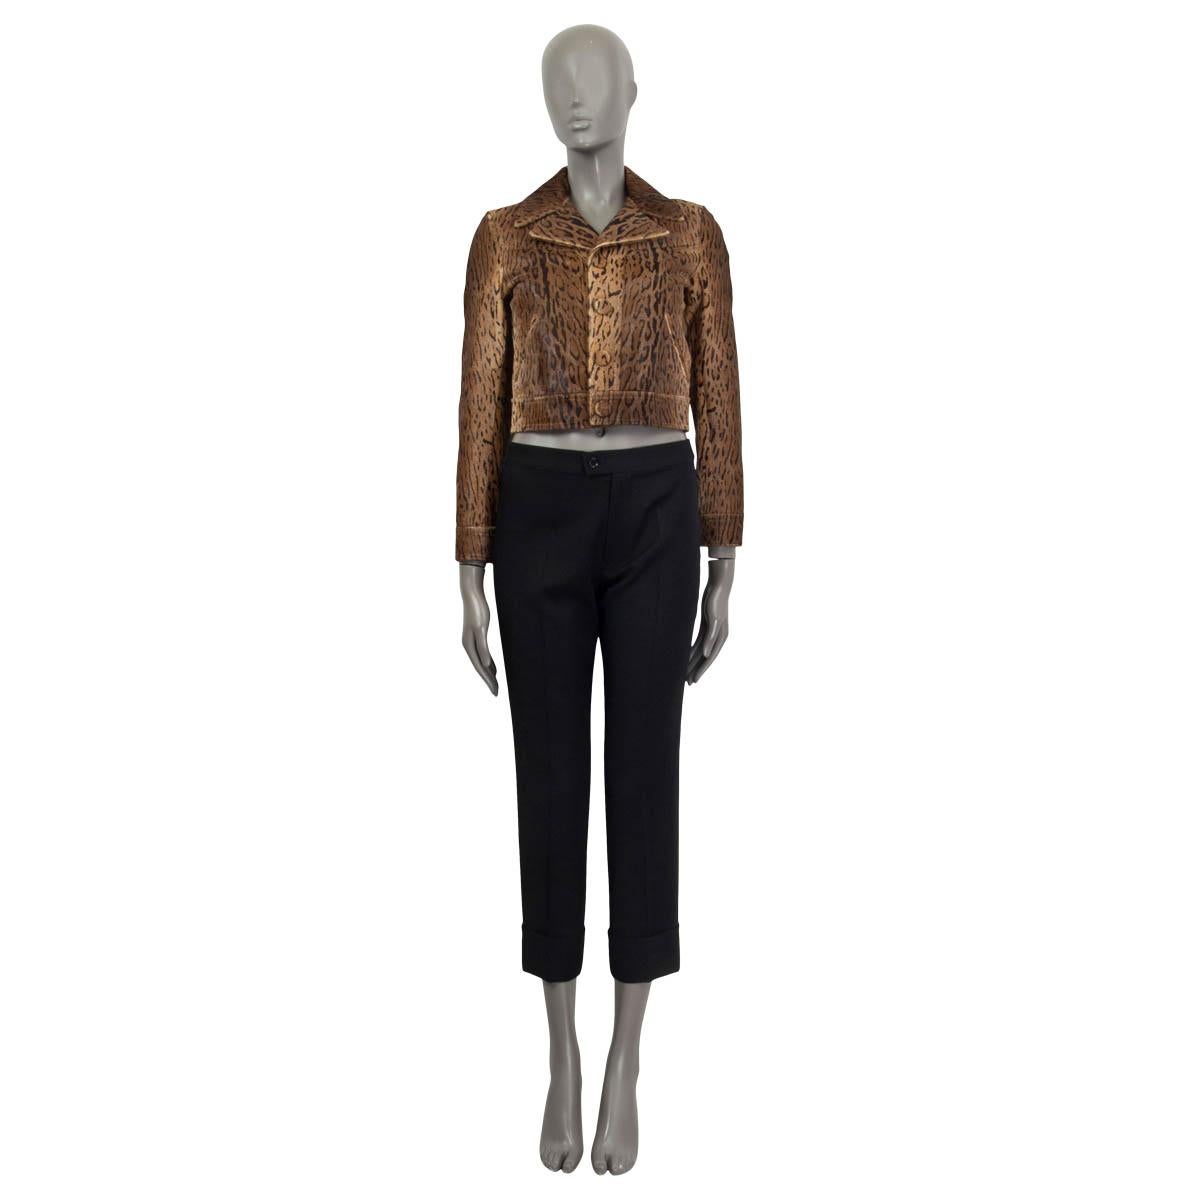 100% authentic Saint Laurent cropped leopard printed jacket in brown calf leather (100%). Features buttoned cuffs and two slit pockets on the front. Opens with four push buttons on the front. Lined in black cotton (55%) and cupro (45%). Has been